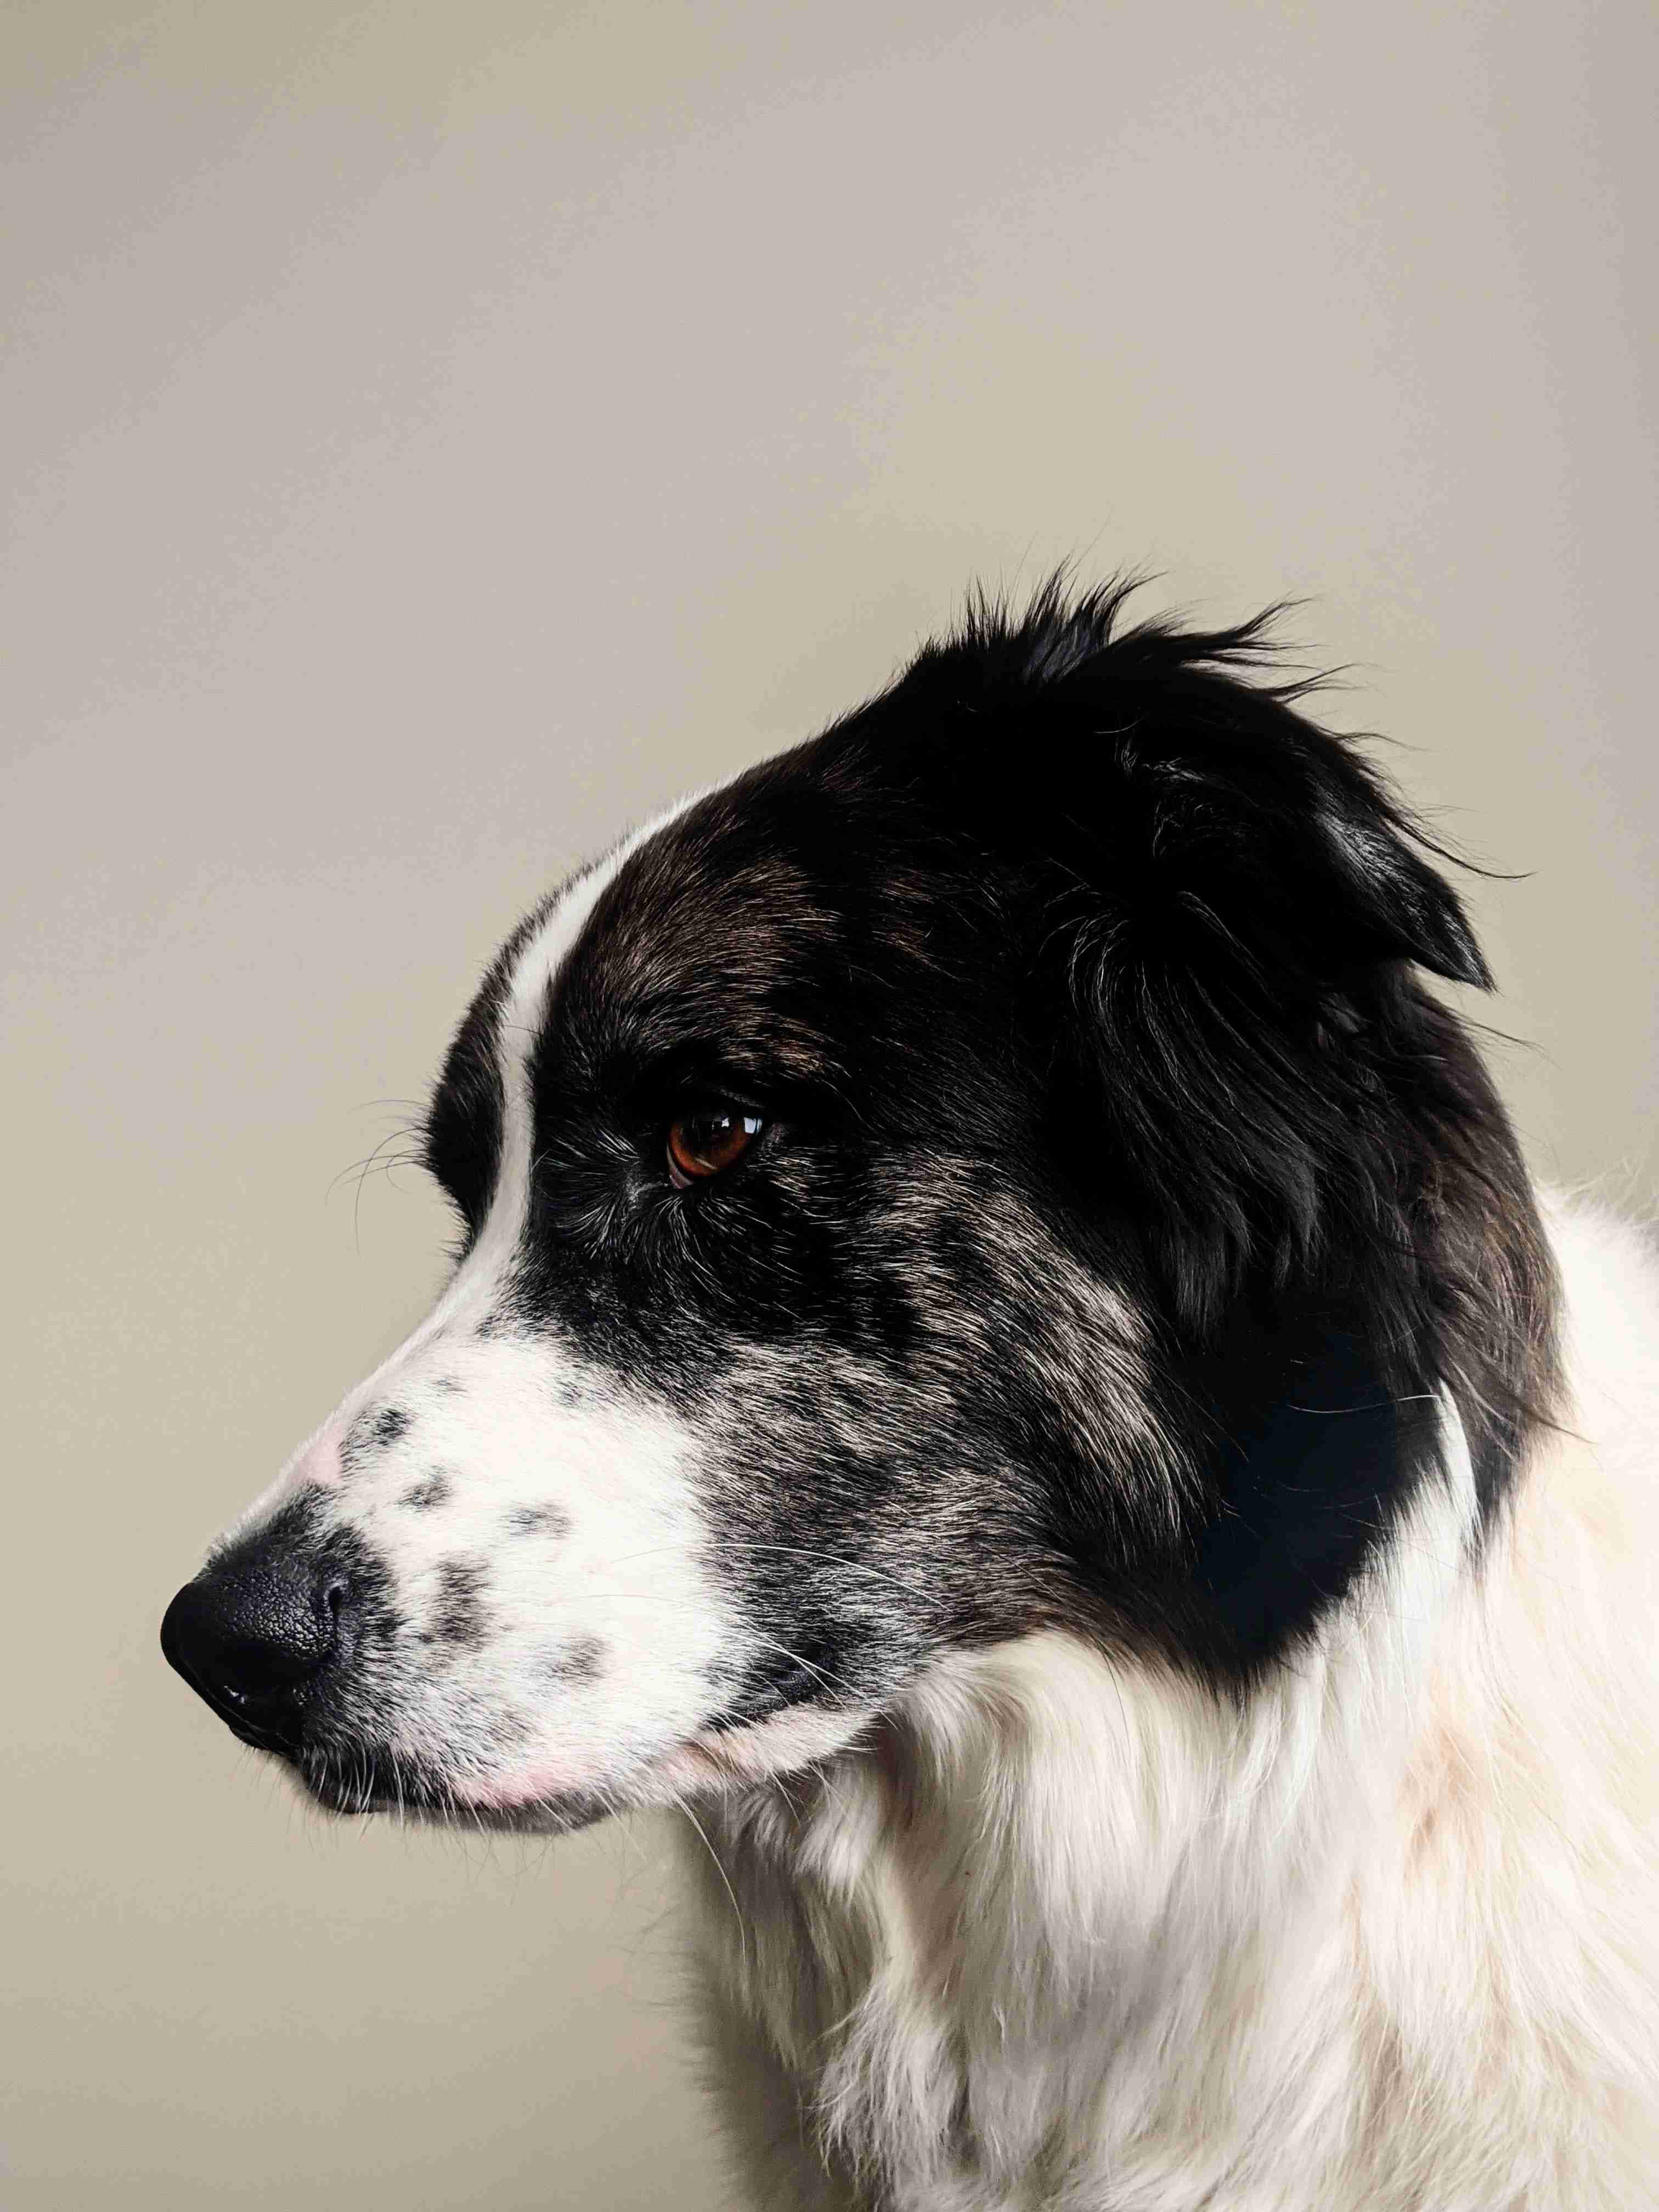 Teaching Your Border Collie to Socialize: Expert Tips for Comforting Strangers